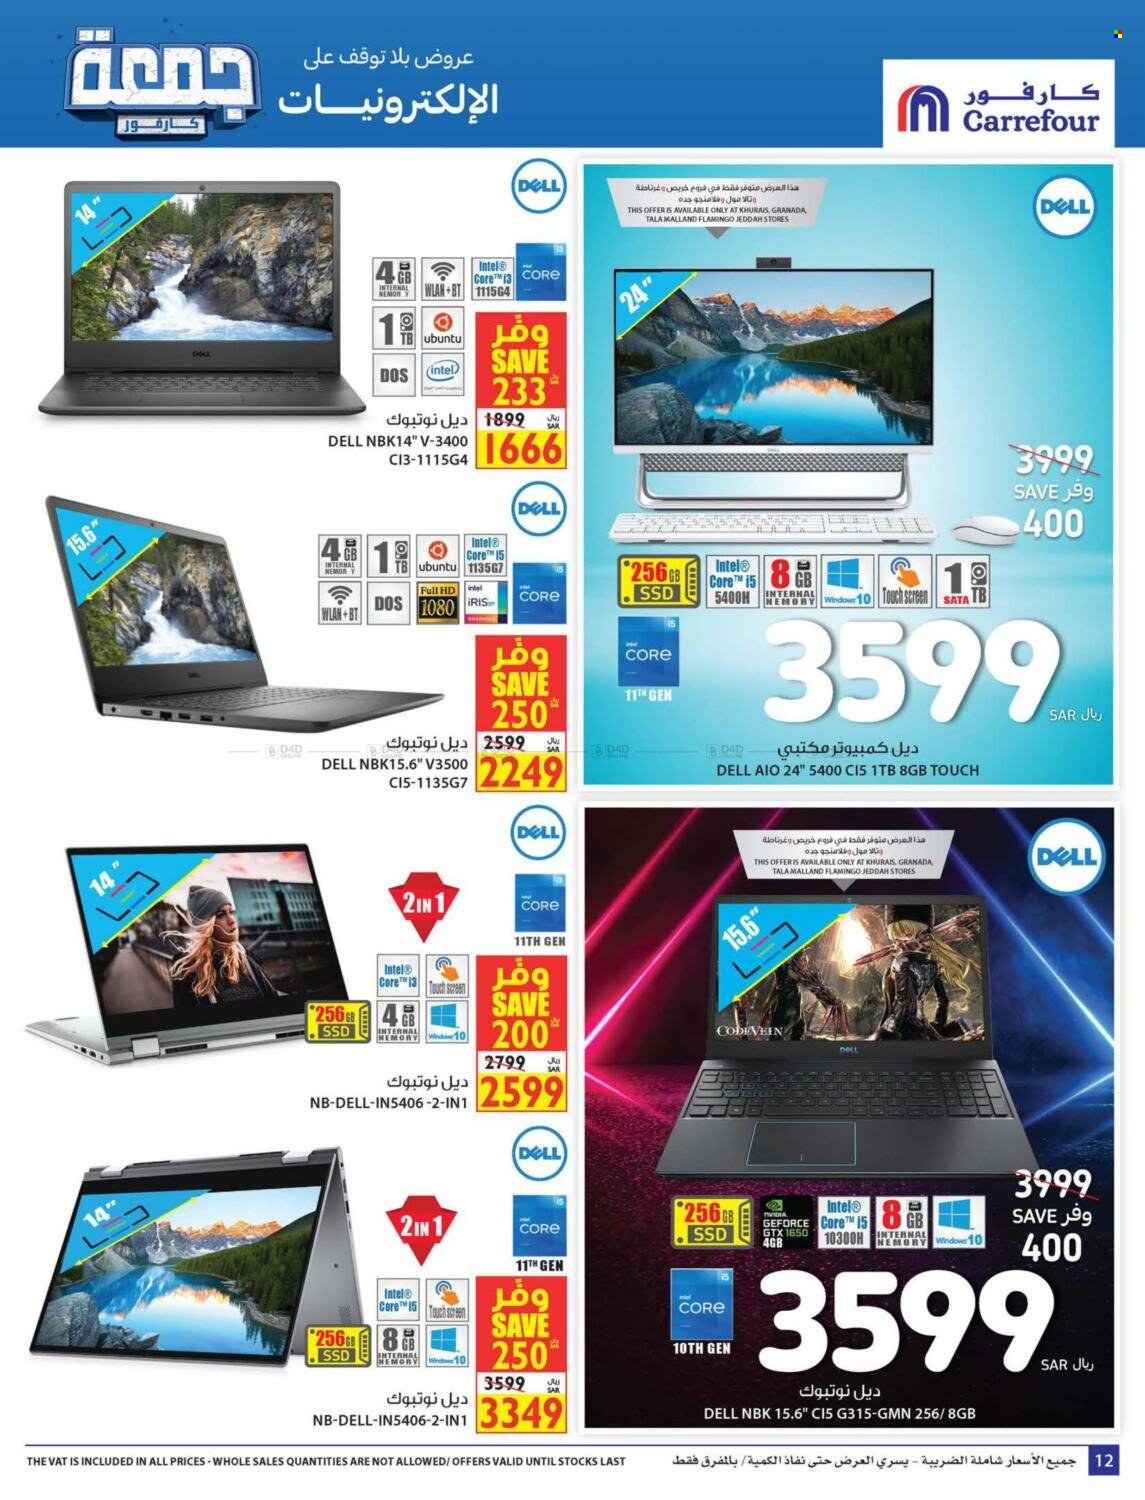 Carrefour flyer  - 10.28.2021 - 11.23.2021. Page 12.